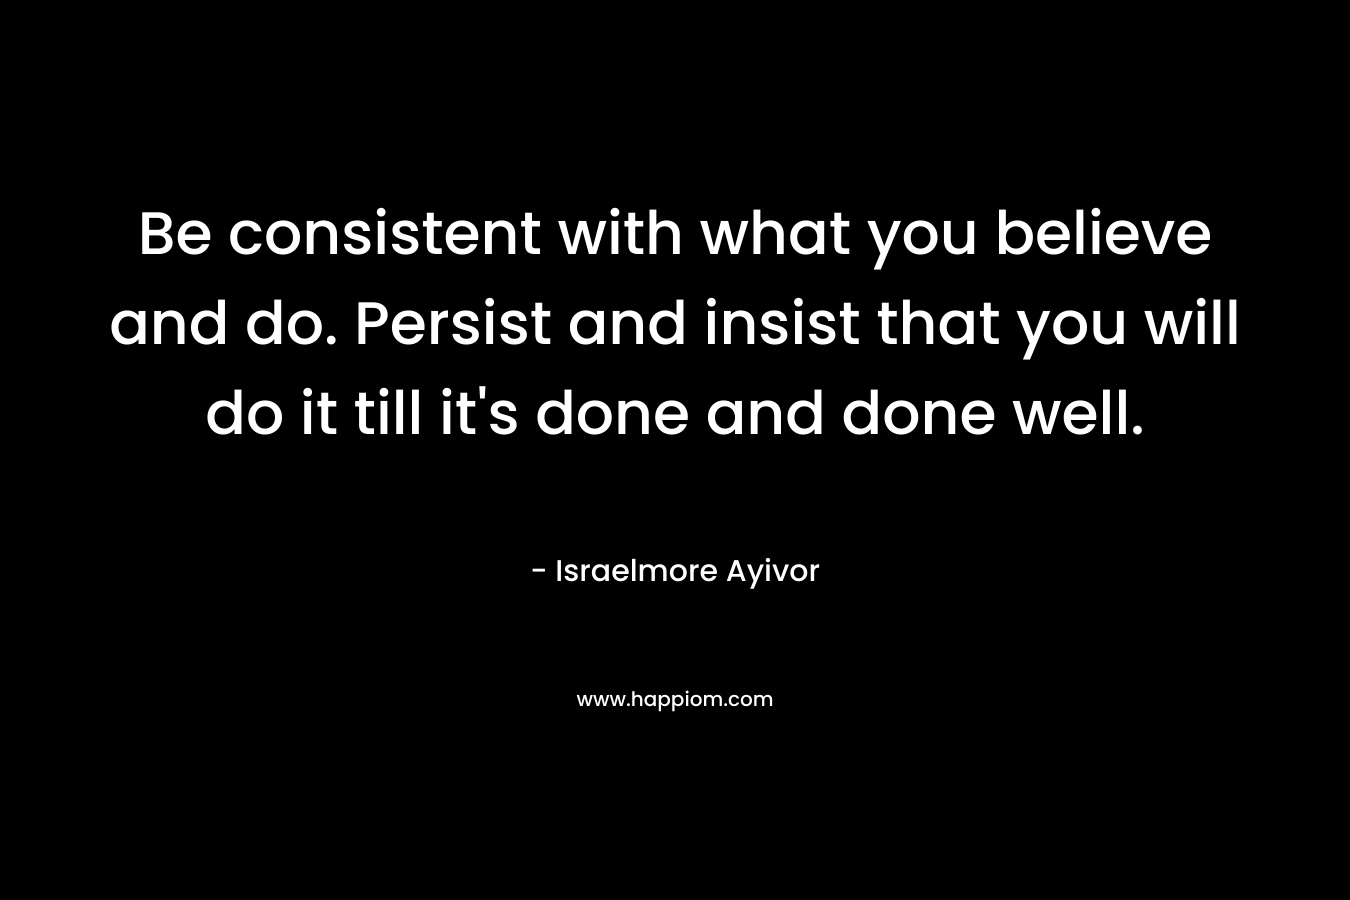 Be consistent with what you believe and do. Persist and insist that you will do it till it's done and done well.